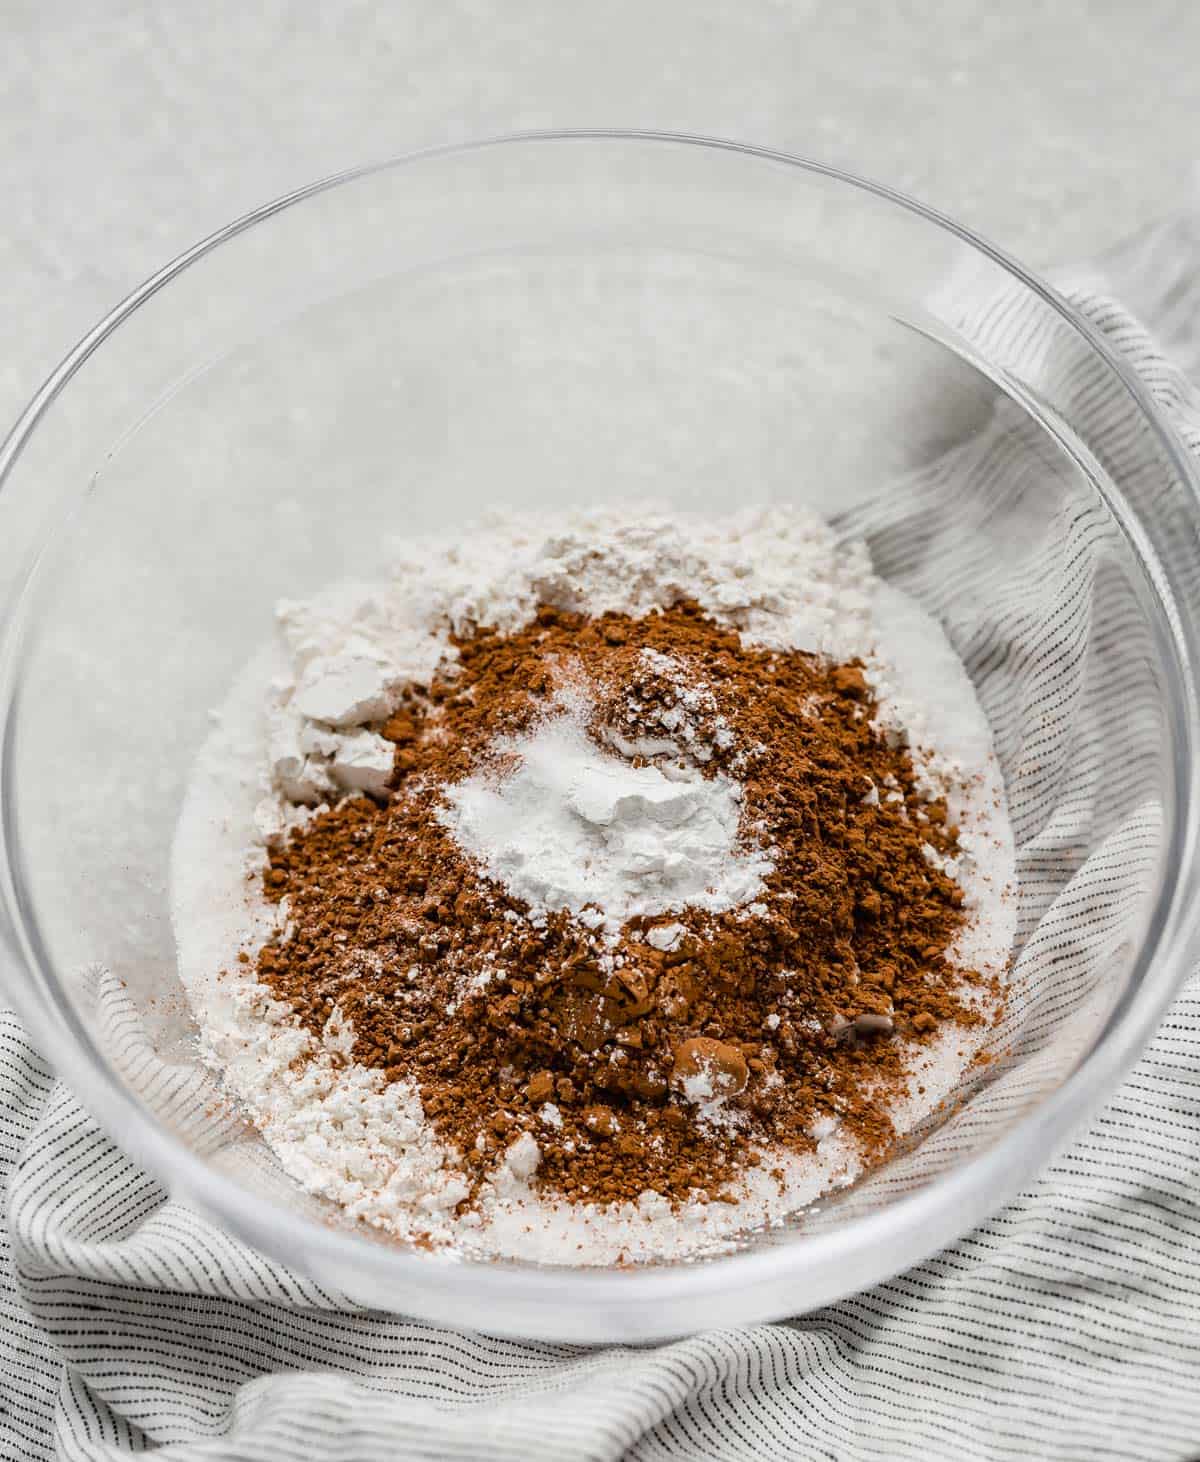 A glass bowl with dry ingredients in it, including baking powder, for making hot fudge pudding cake.